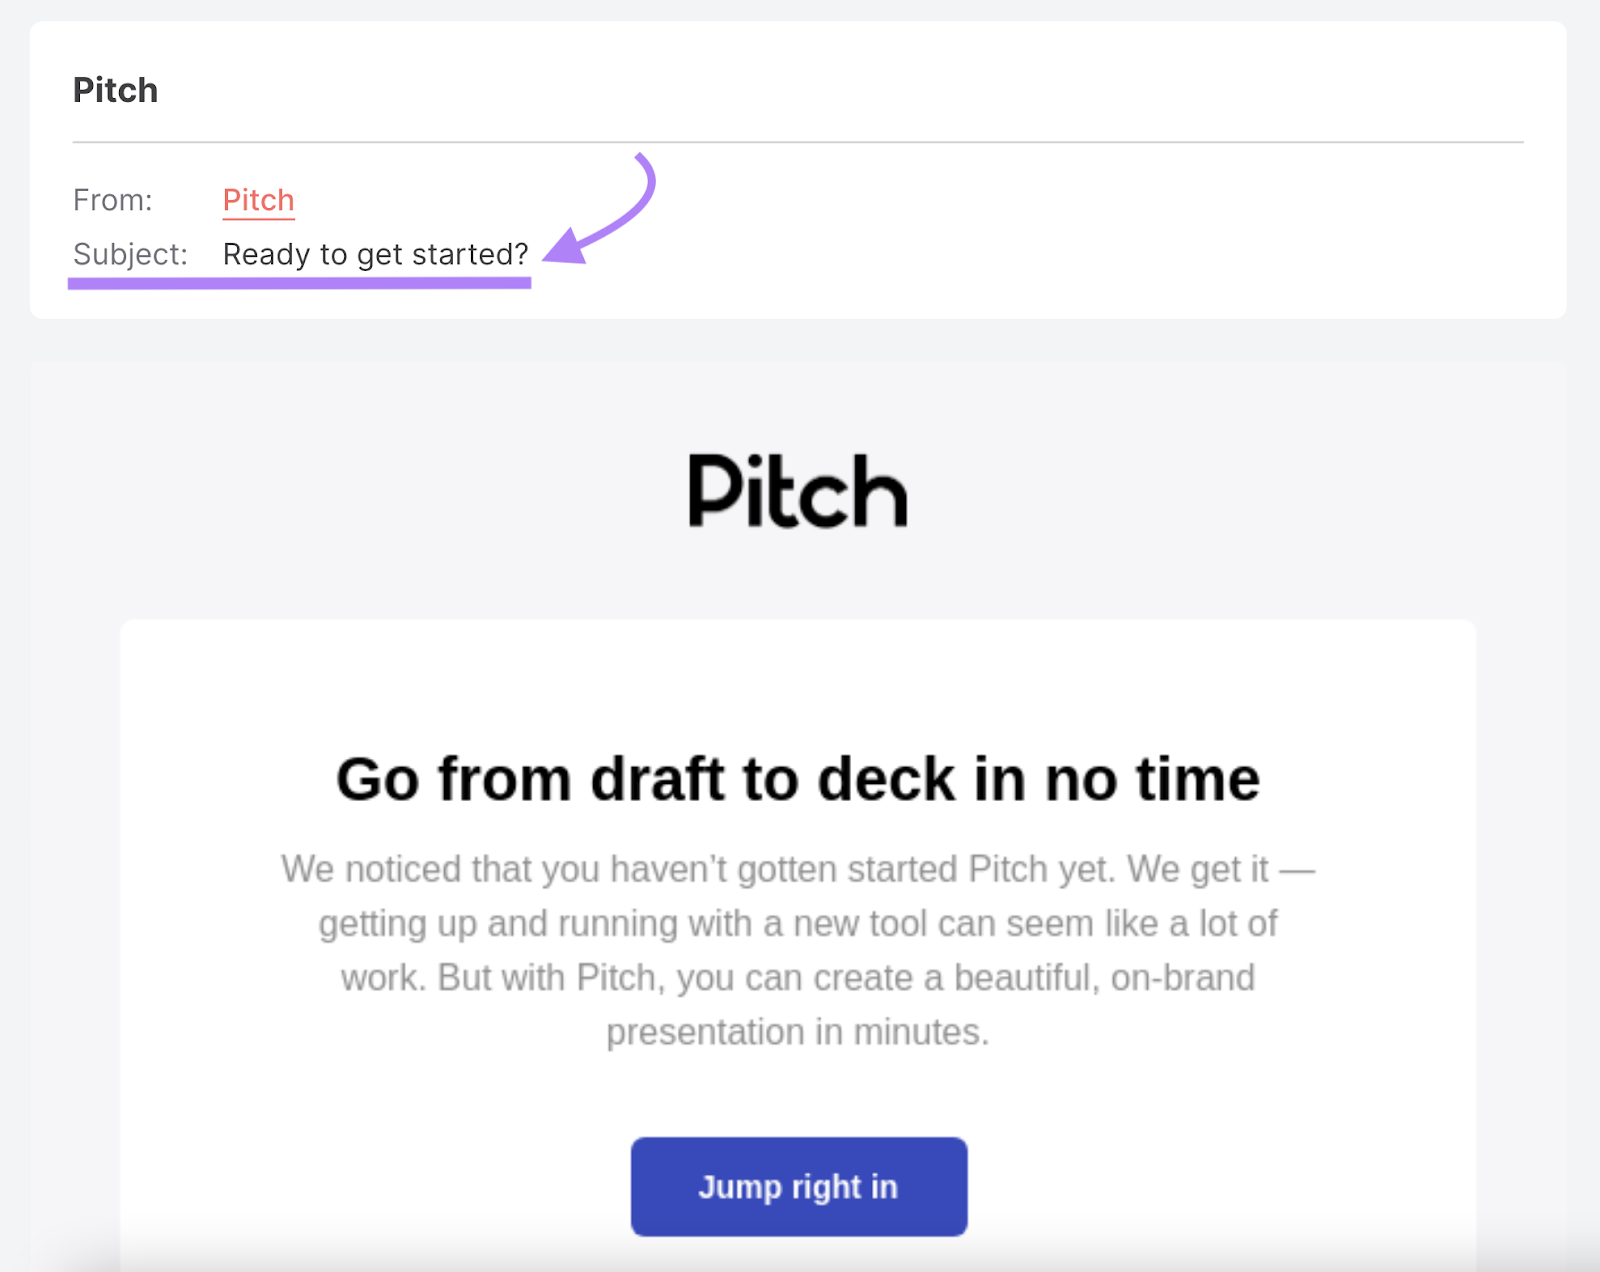 an example of Pitch's subject line “Ready to get started?”